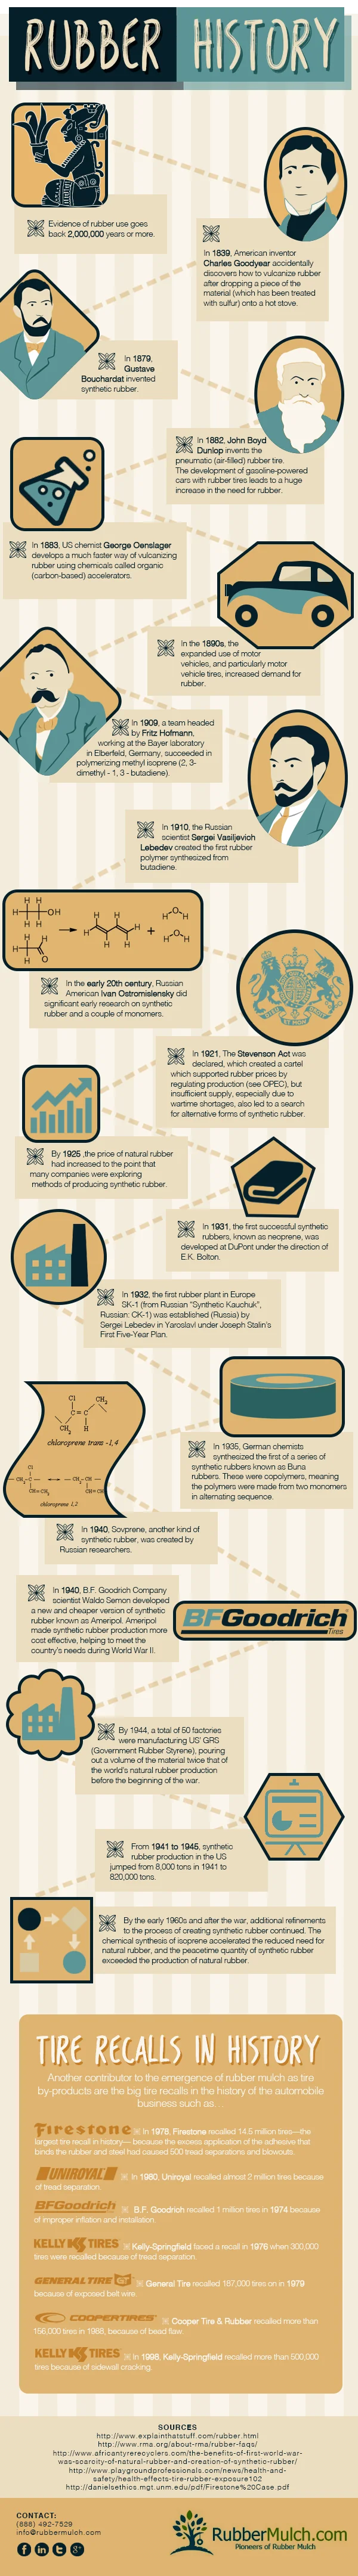 History of Rubber